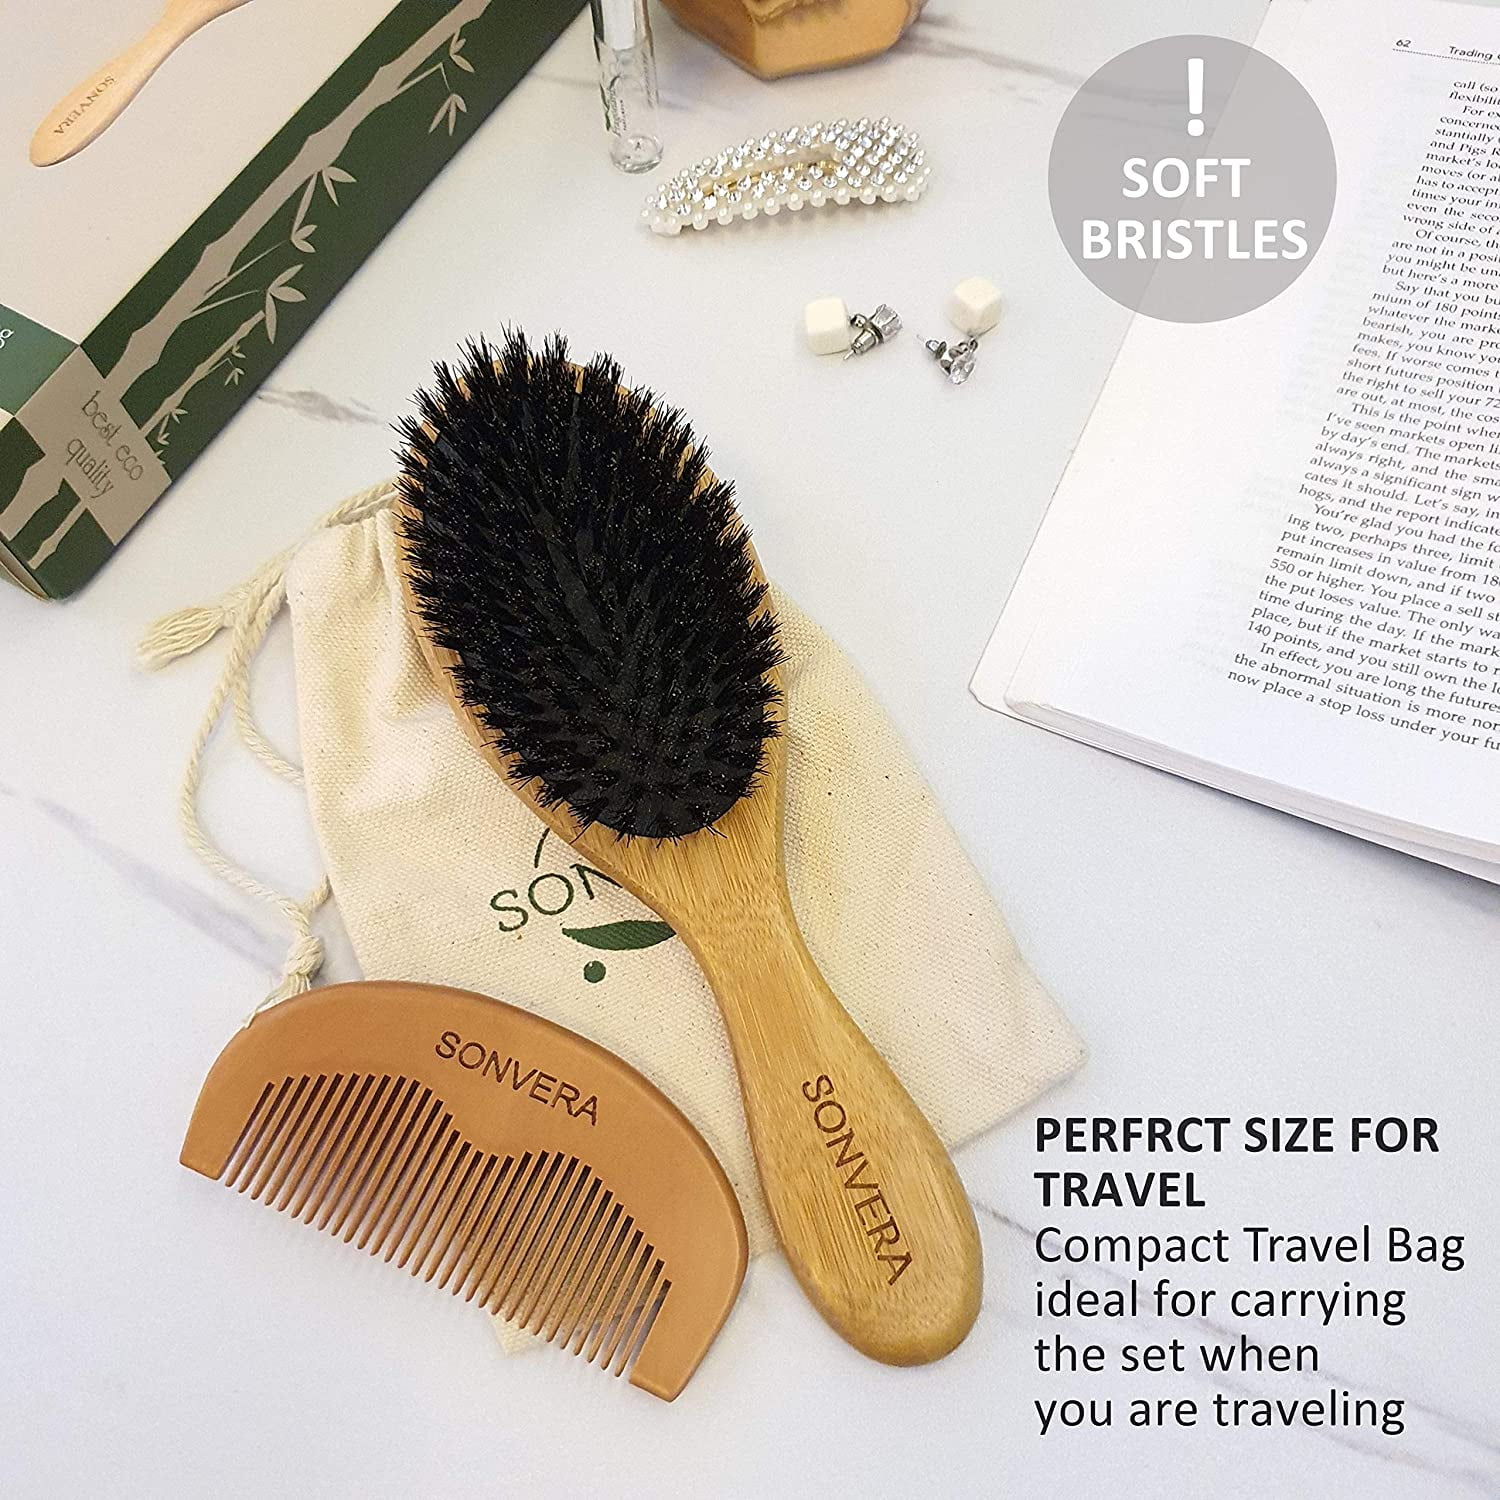 Dovahlia Boar Bristle Hair Brush Set for Women and Men - Designed for Thin  and Normal Hair - Adds Shine and Improves Hair Texture - Wood